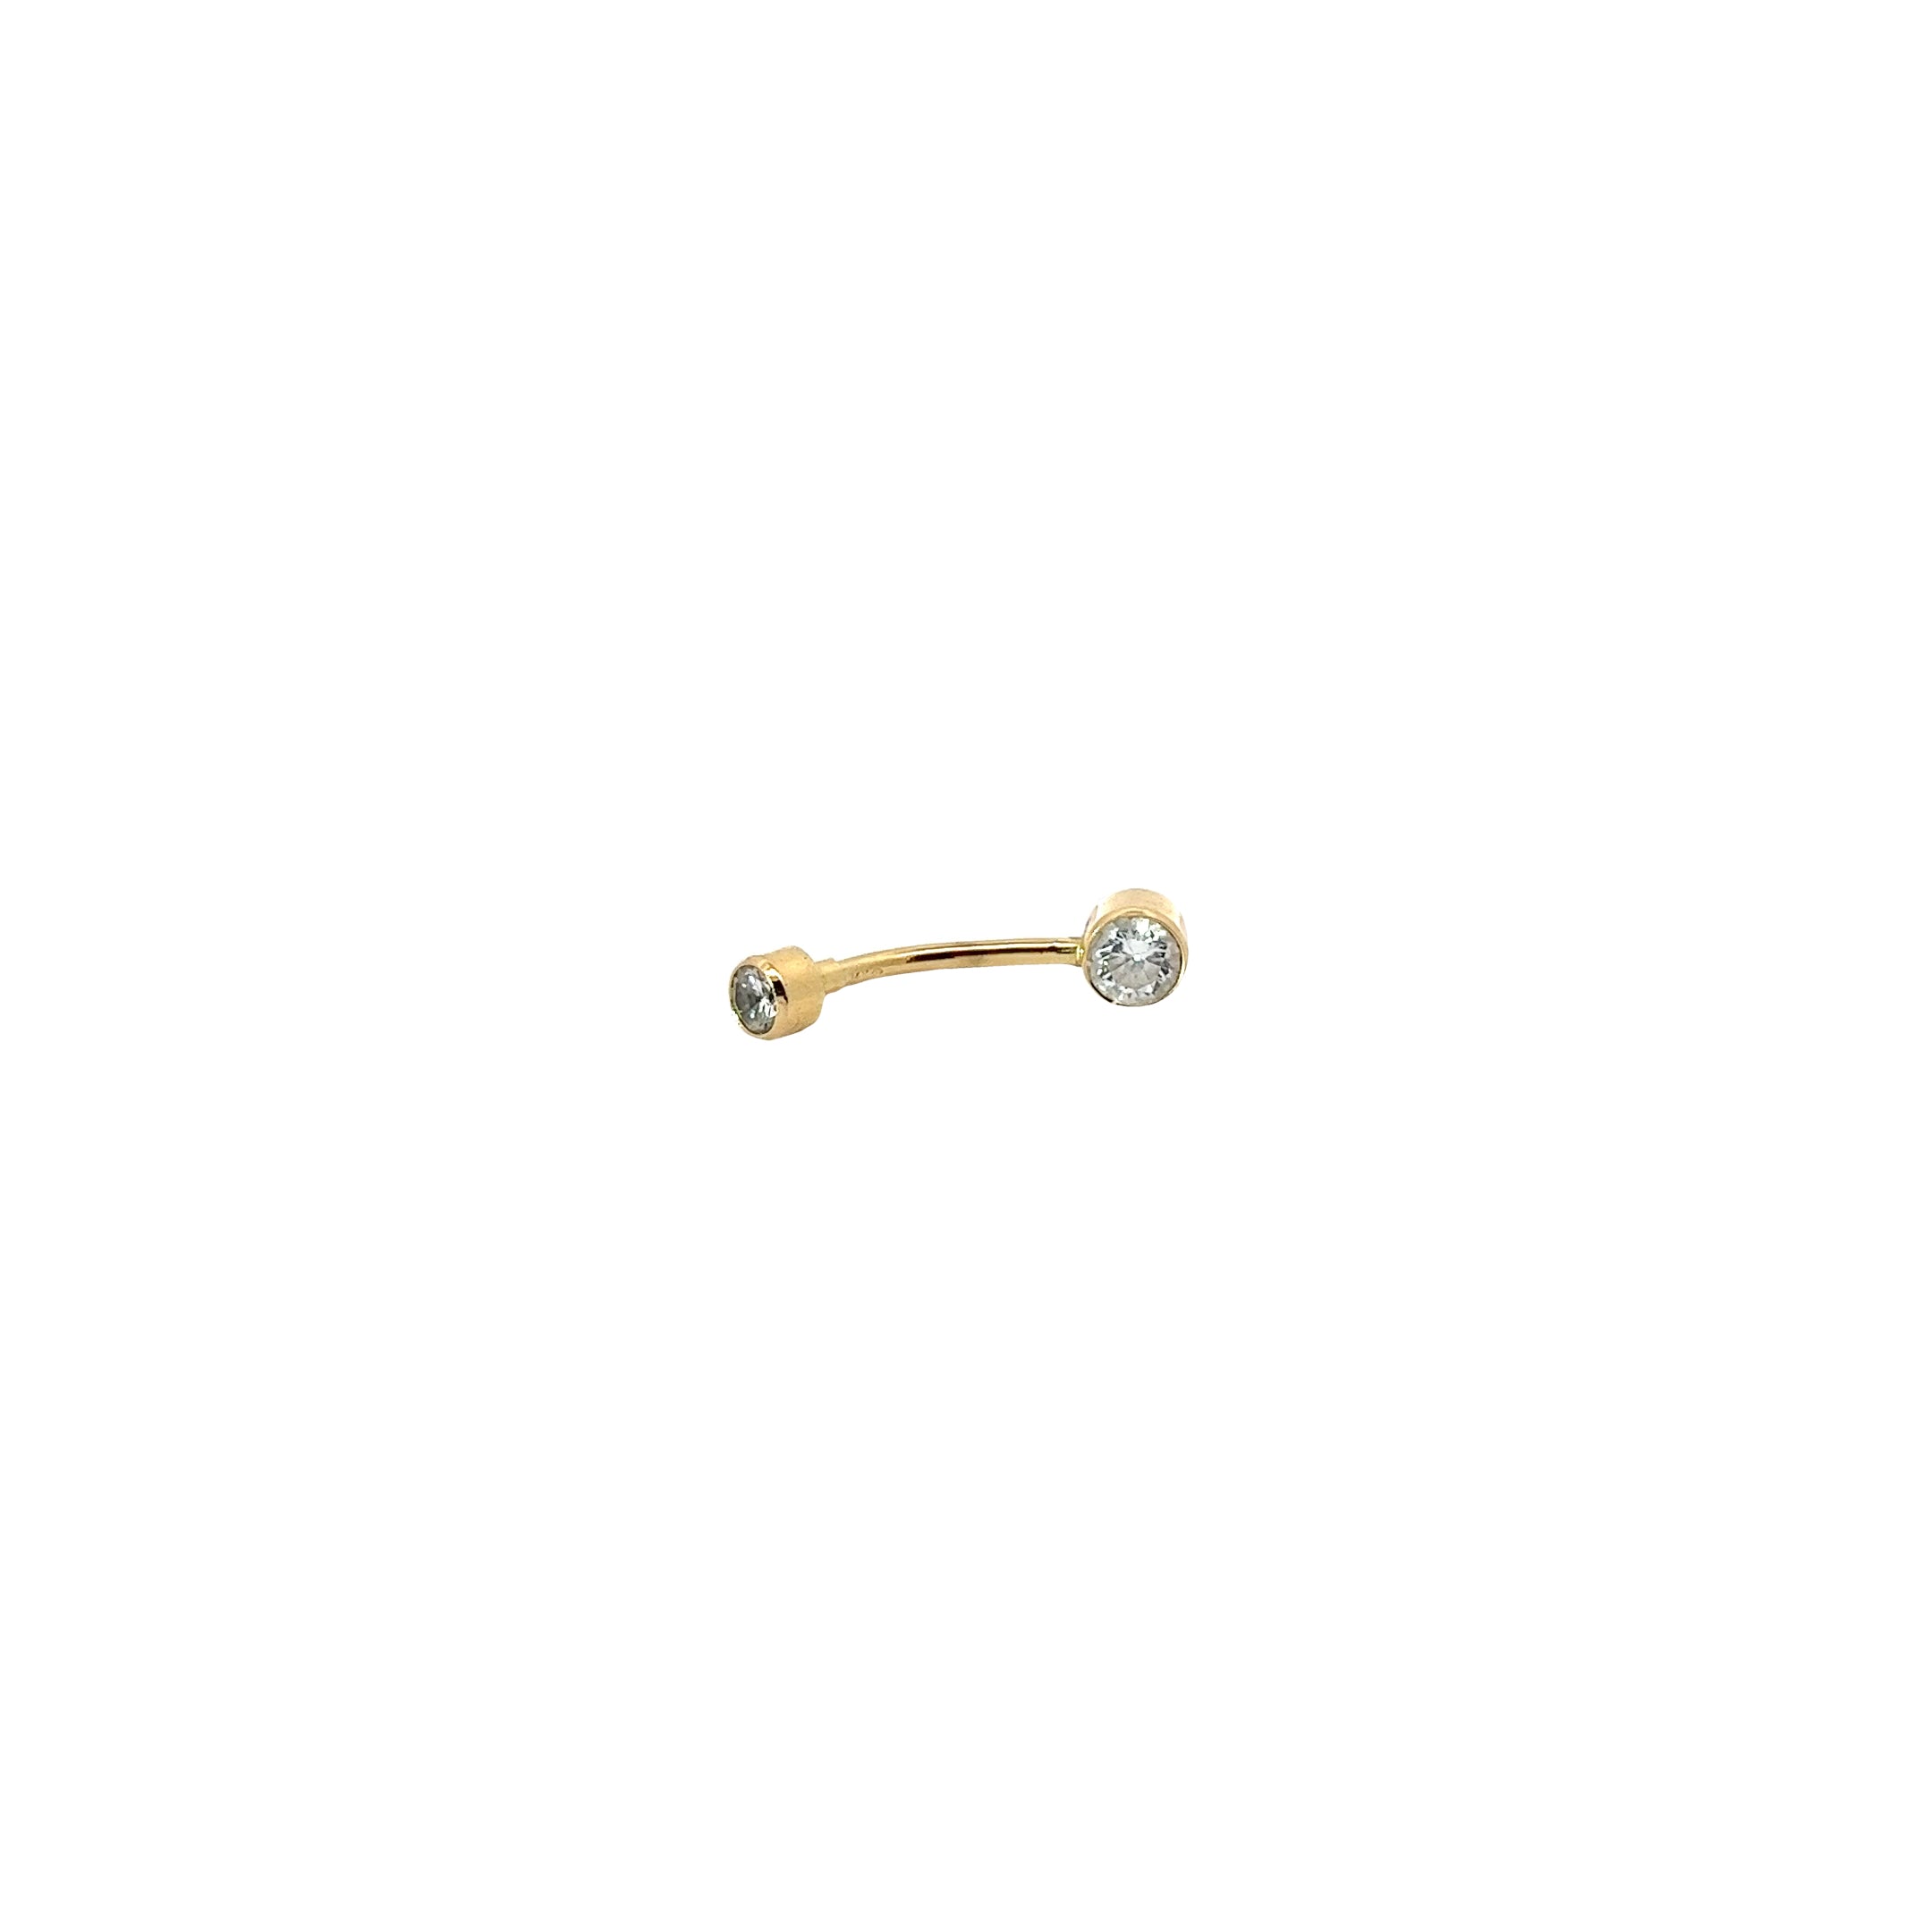 14K YELLOW GOLD CZ BELLY BUTTON RING 1 INCH